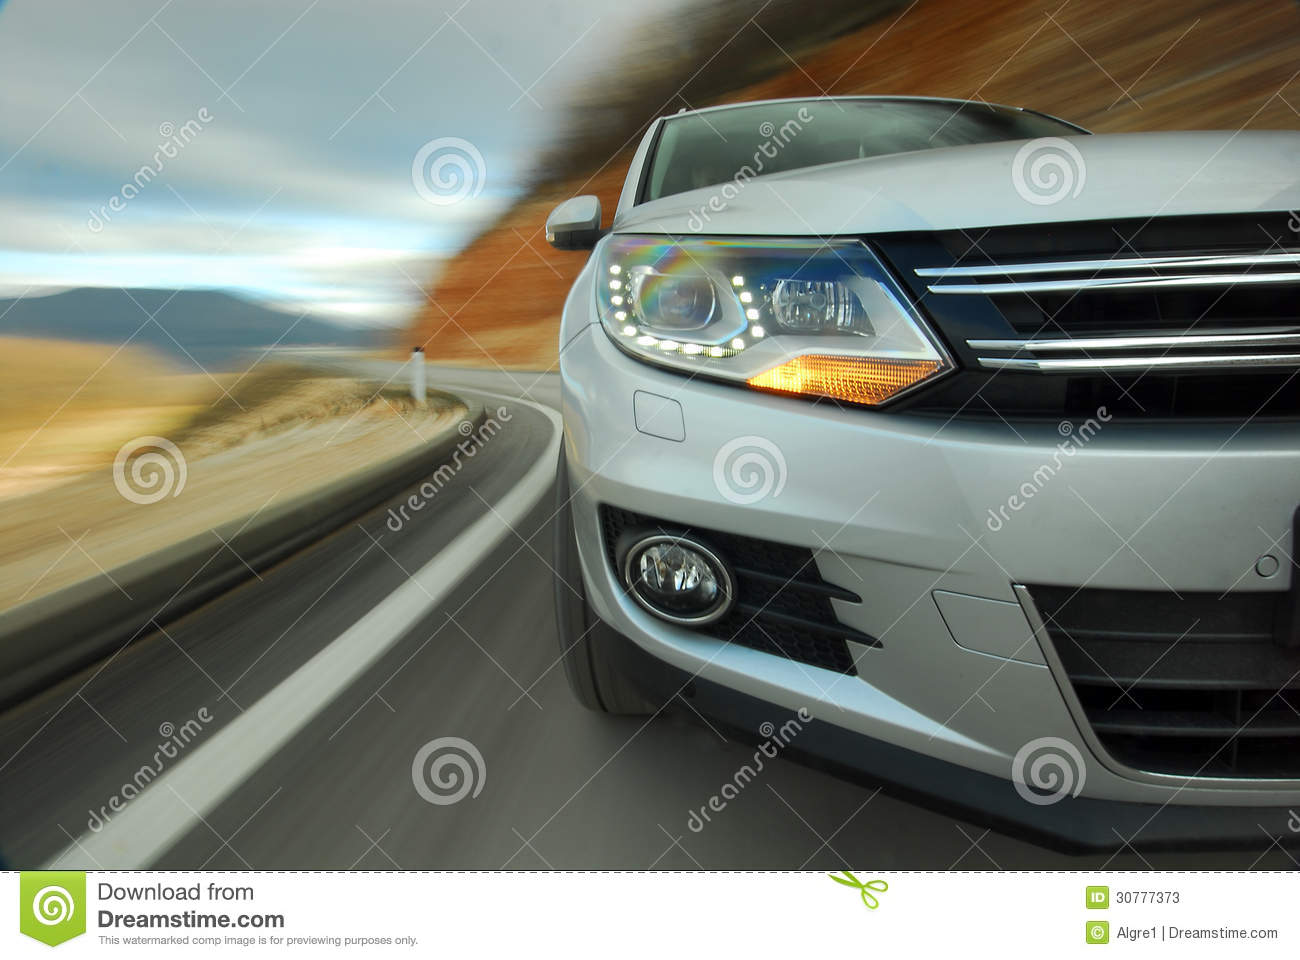 Driving Too Fast Stock Photos   Image  30777373